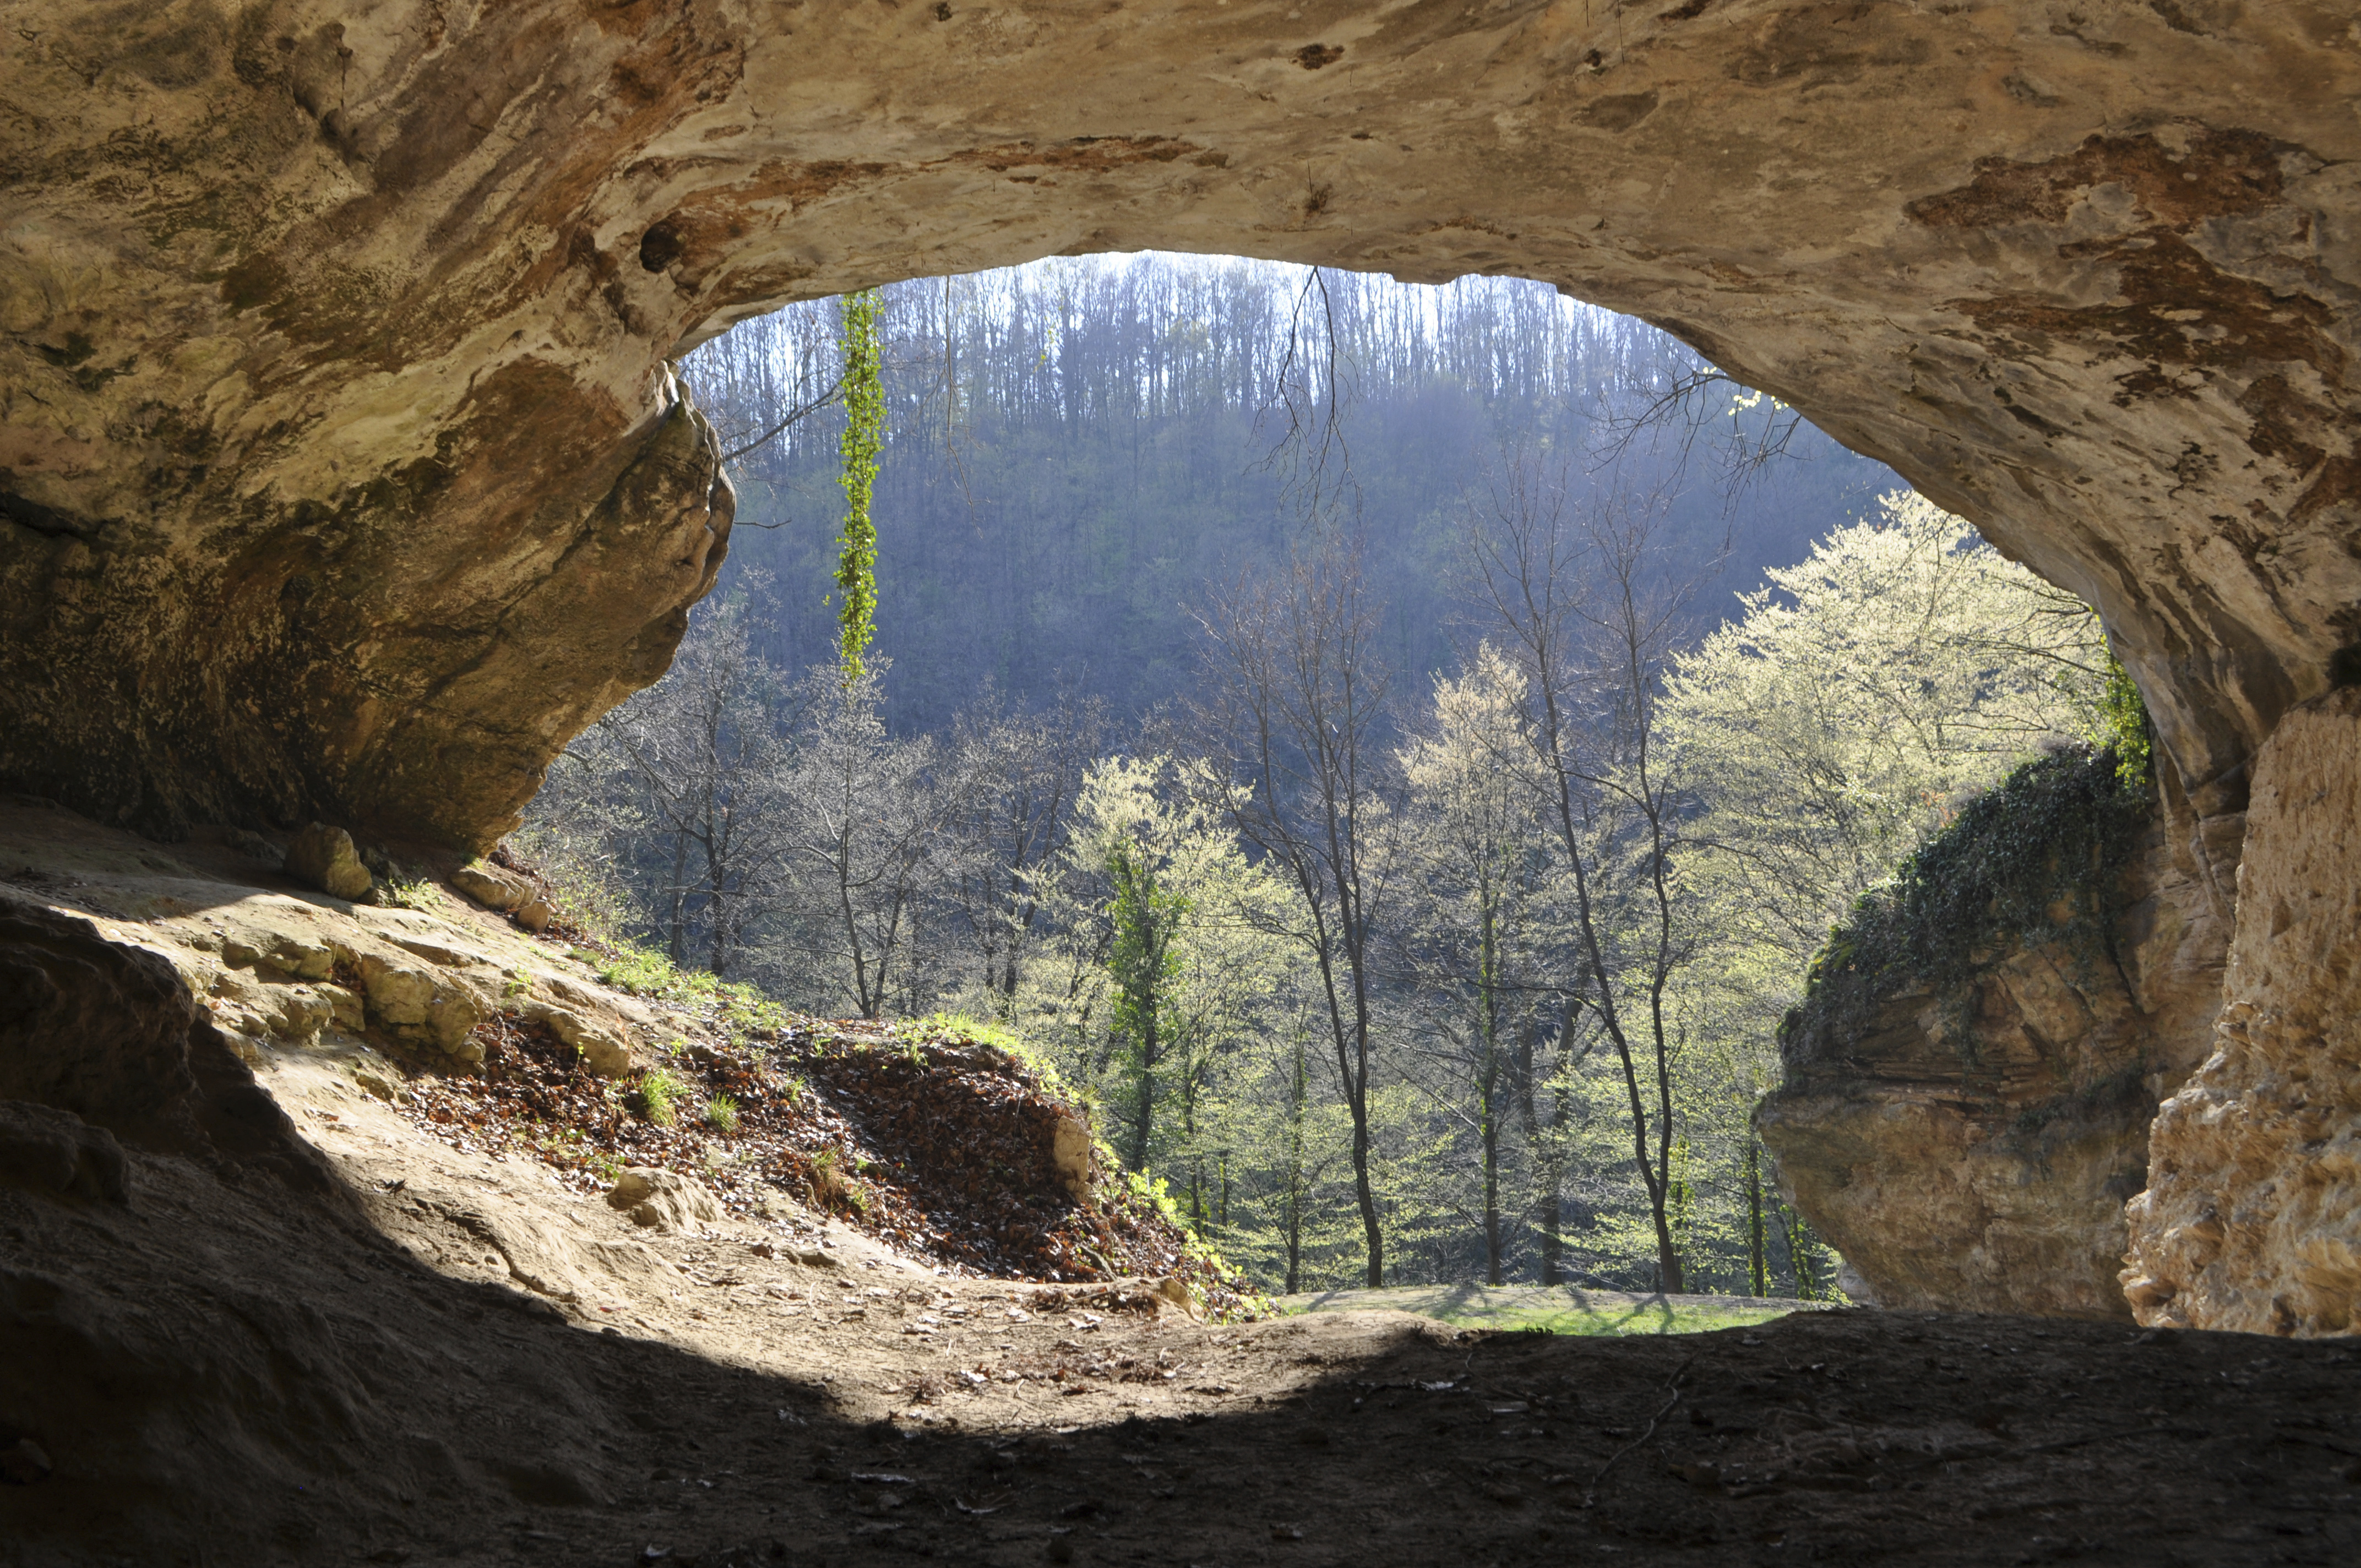 Extinct Human DNA Discovered in Cave Dirt, Scientists Say | Time